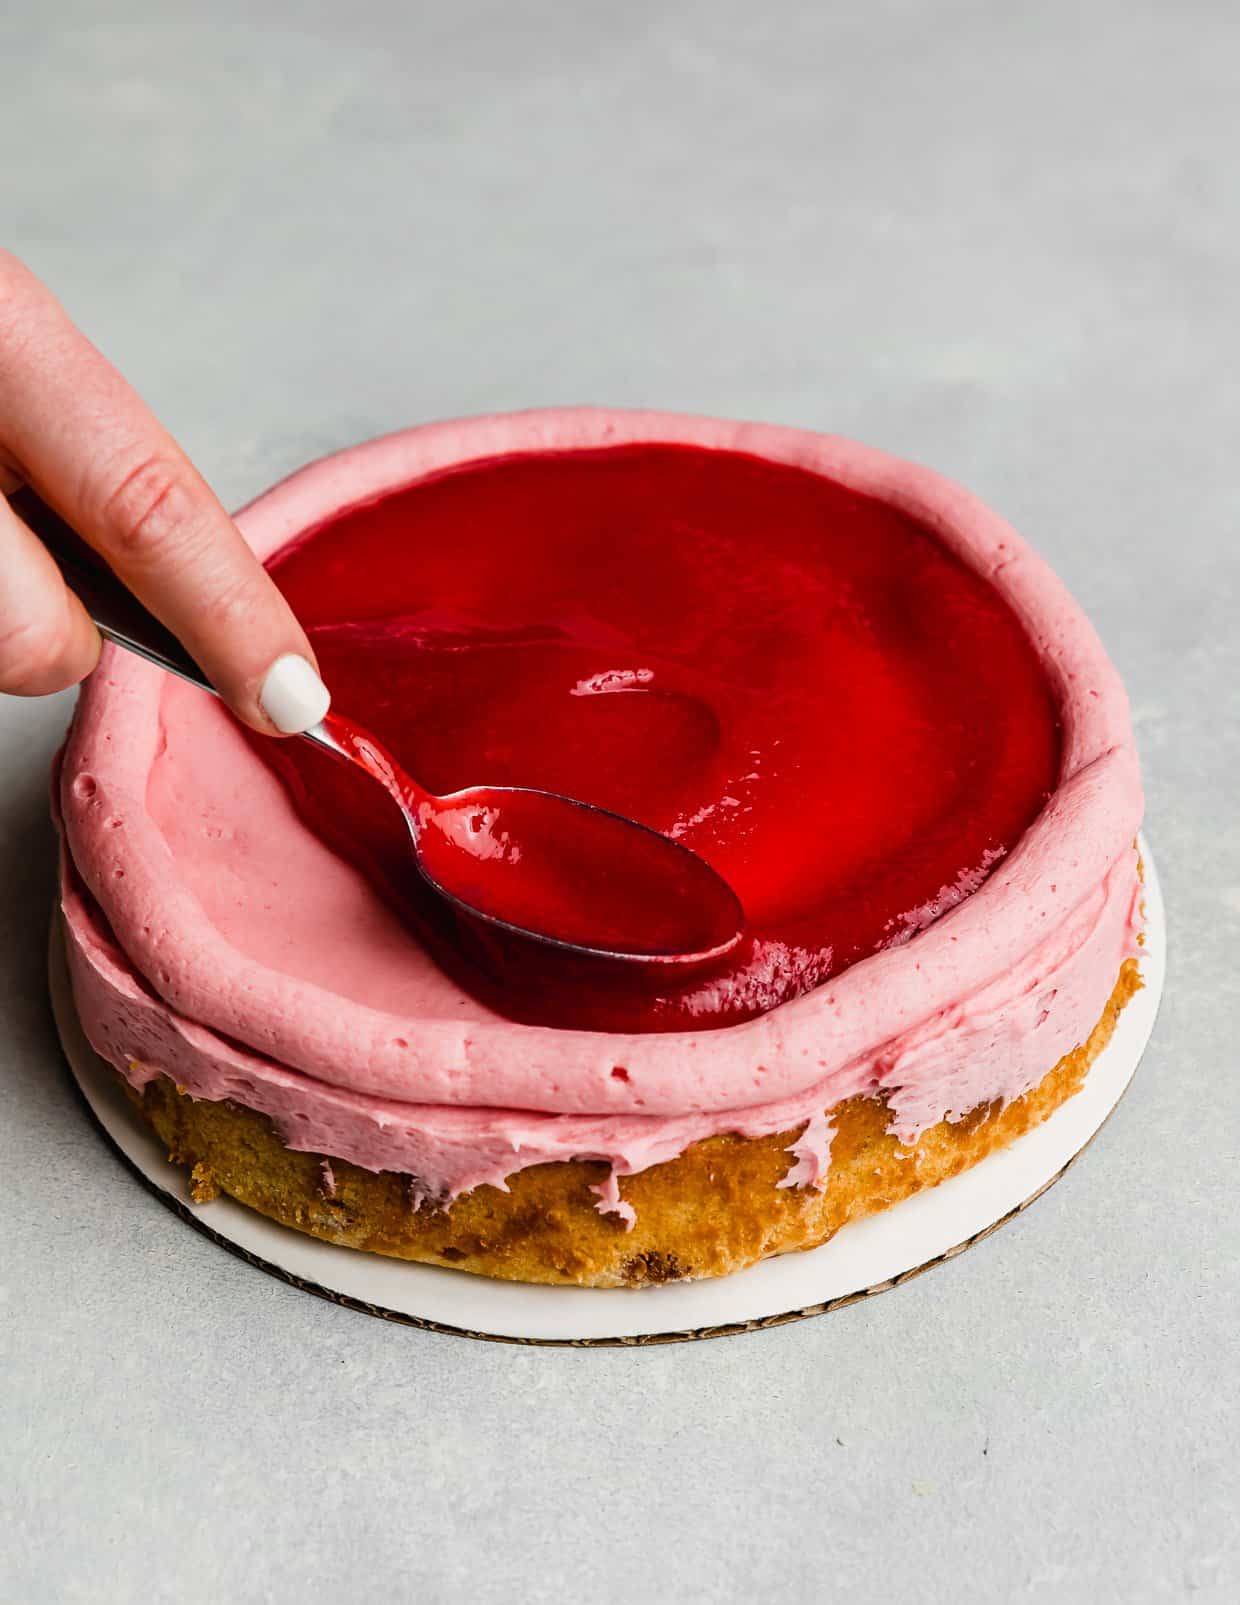 A spoon spreading a raspberry filling overtop a round cake layer that has a buttercream dam piped around the perimeter.